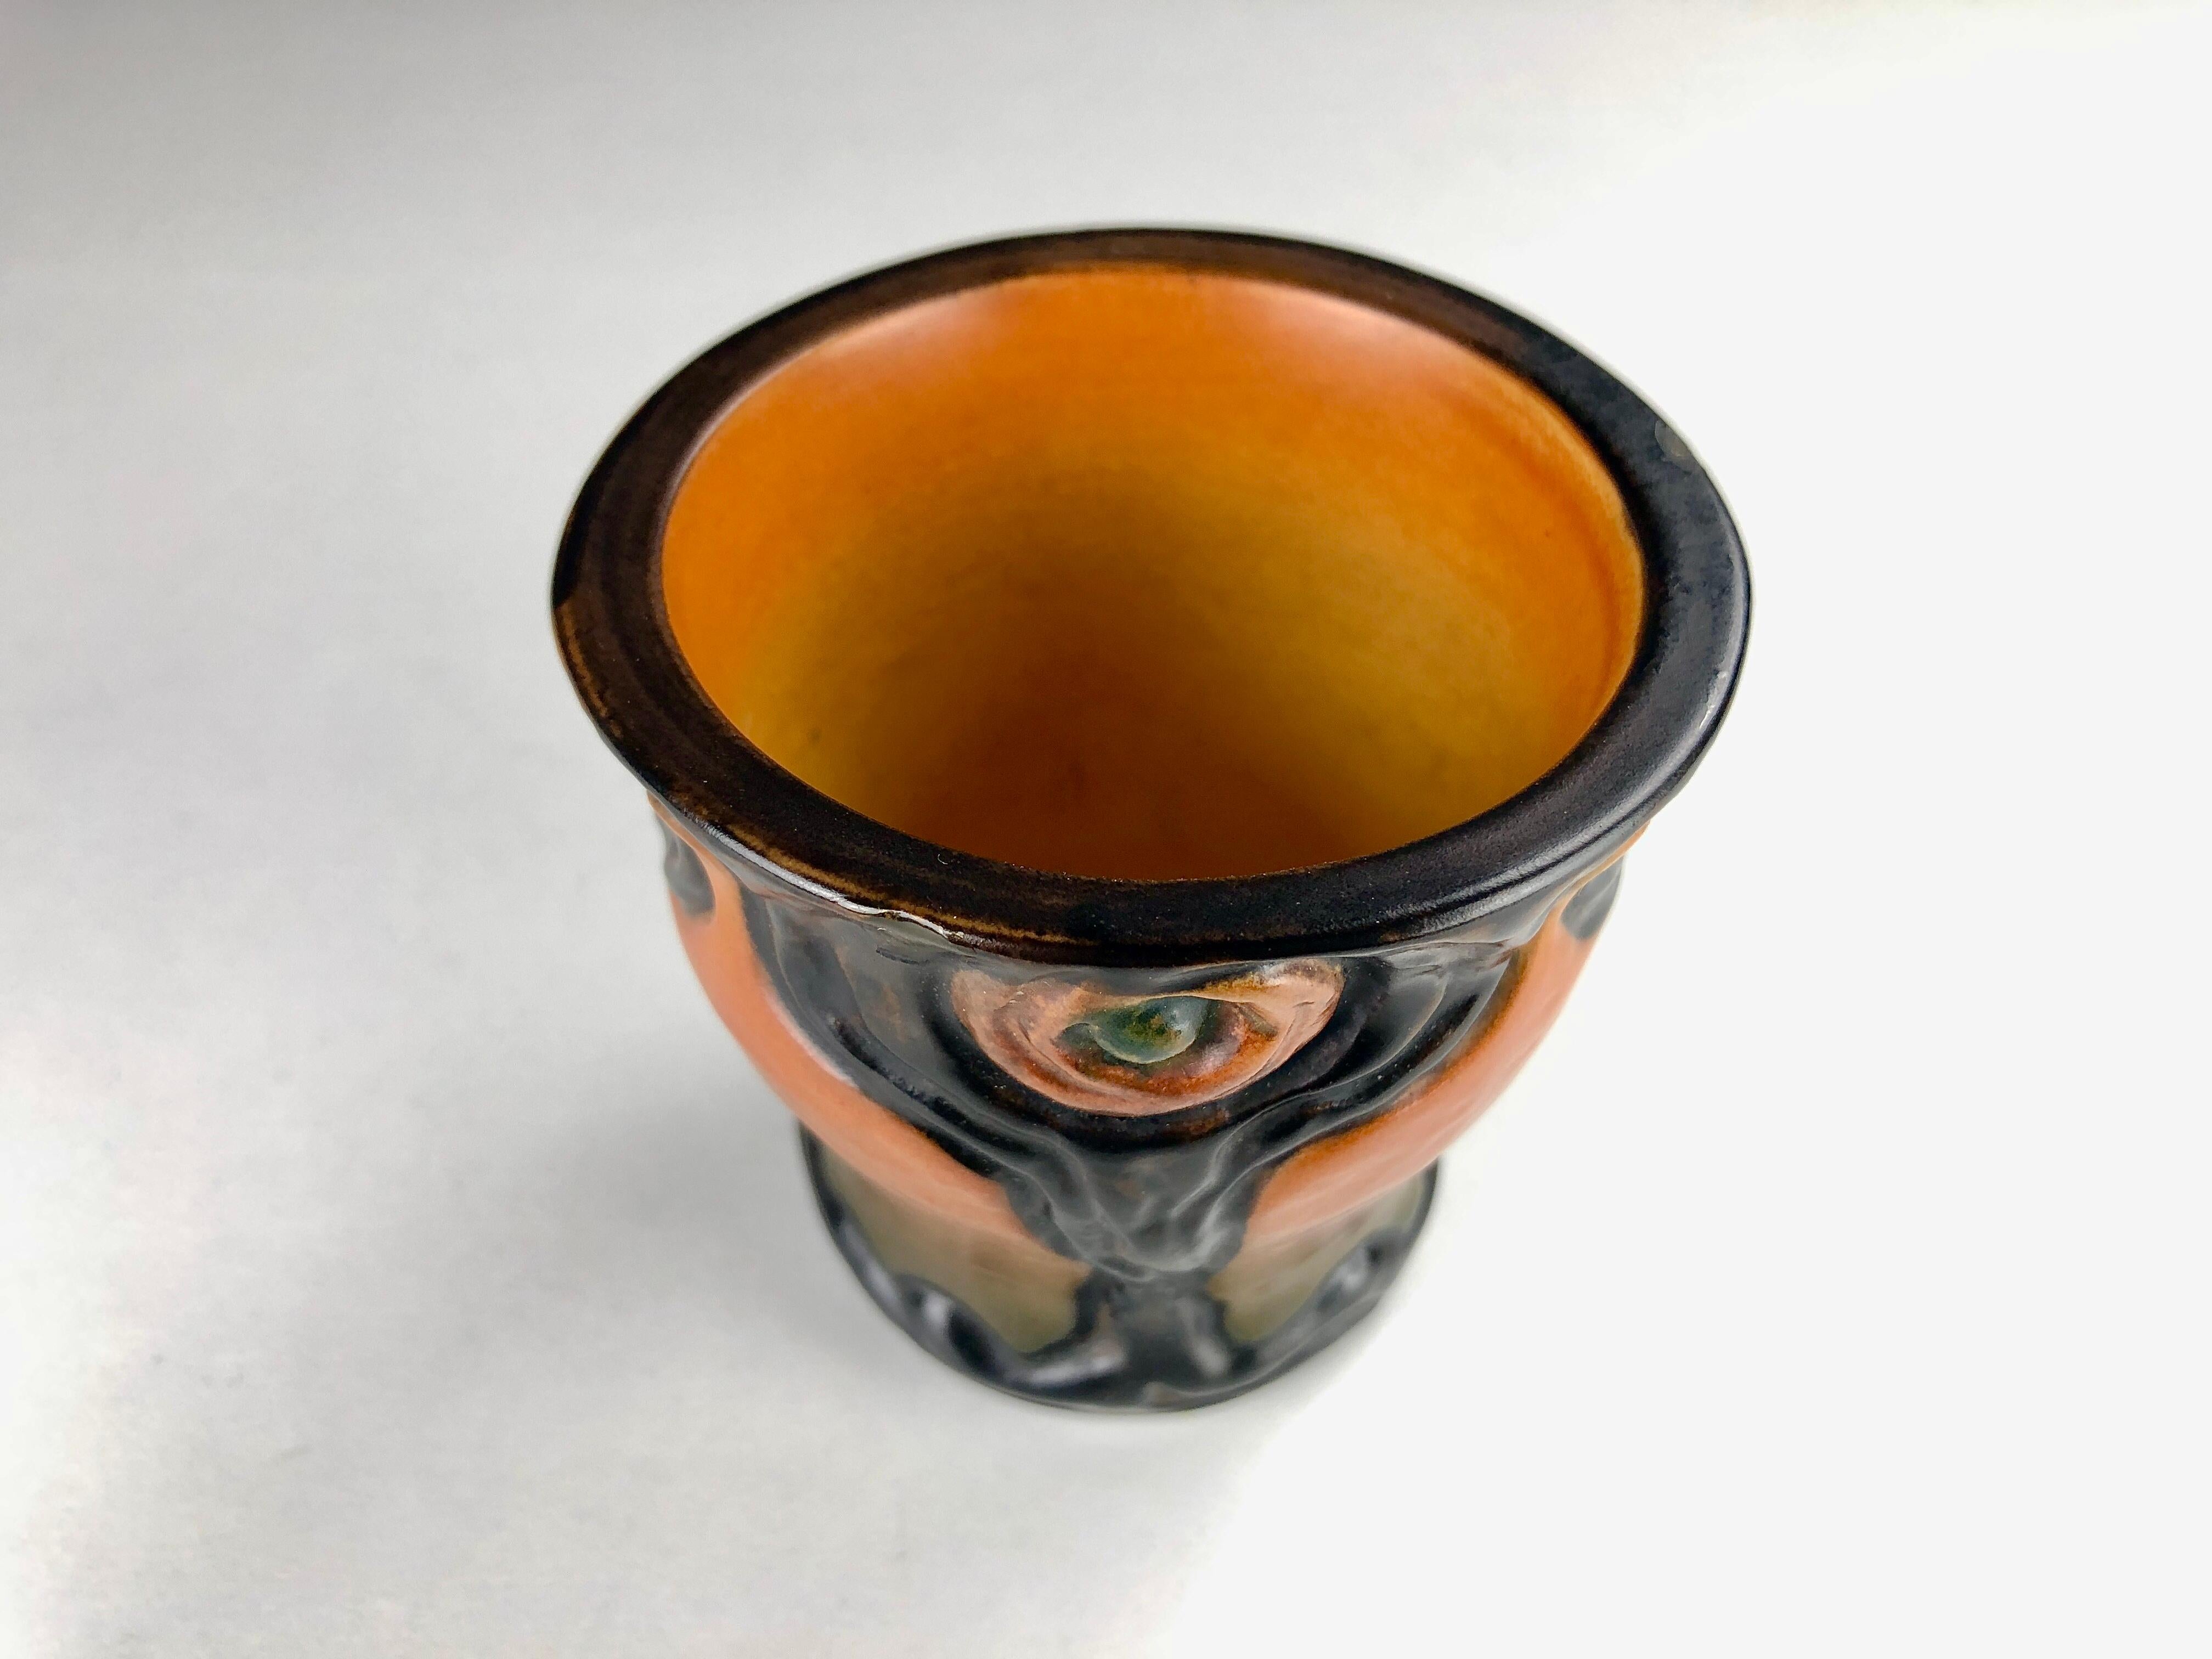 20th Century 1920's Hand-Crafted Small Danish Art Nouveau Vase or Bowl by P. Ipsens Enke For Sale